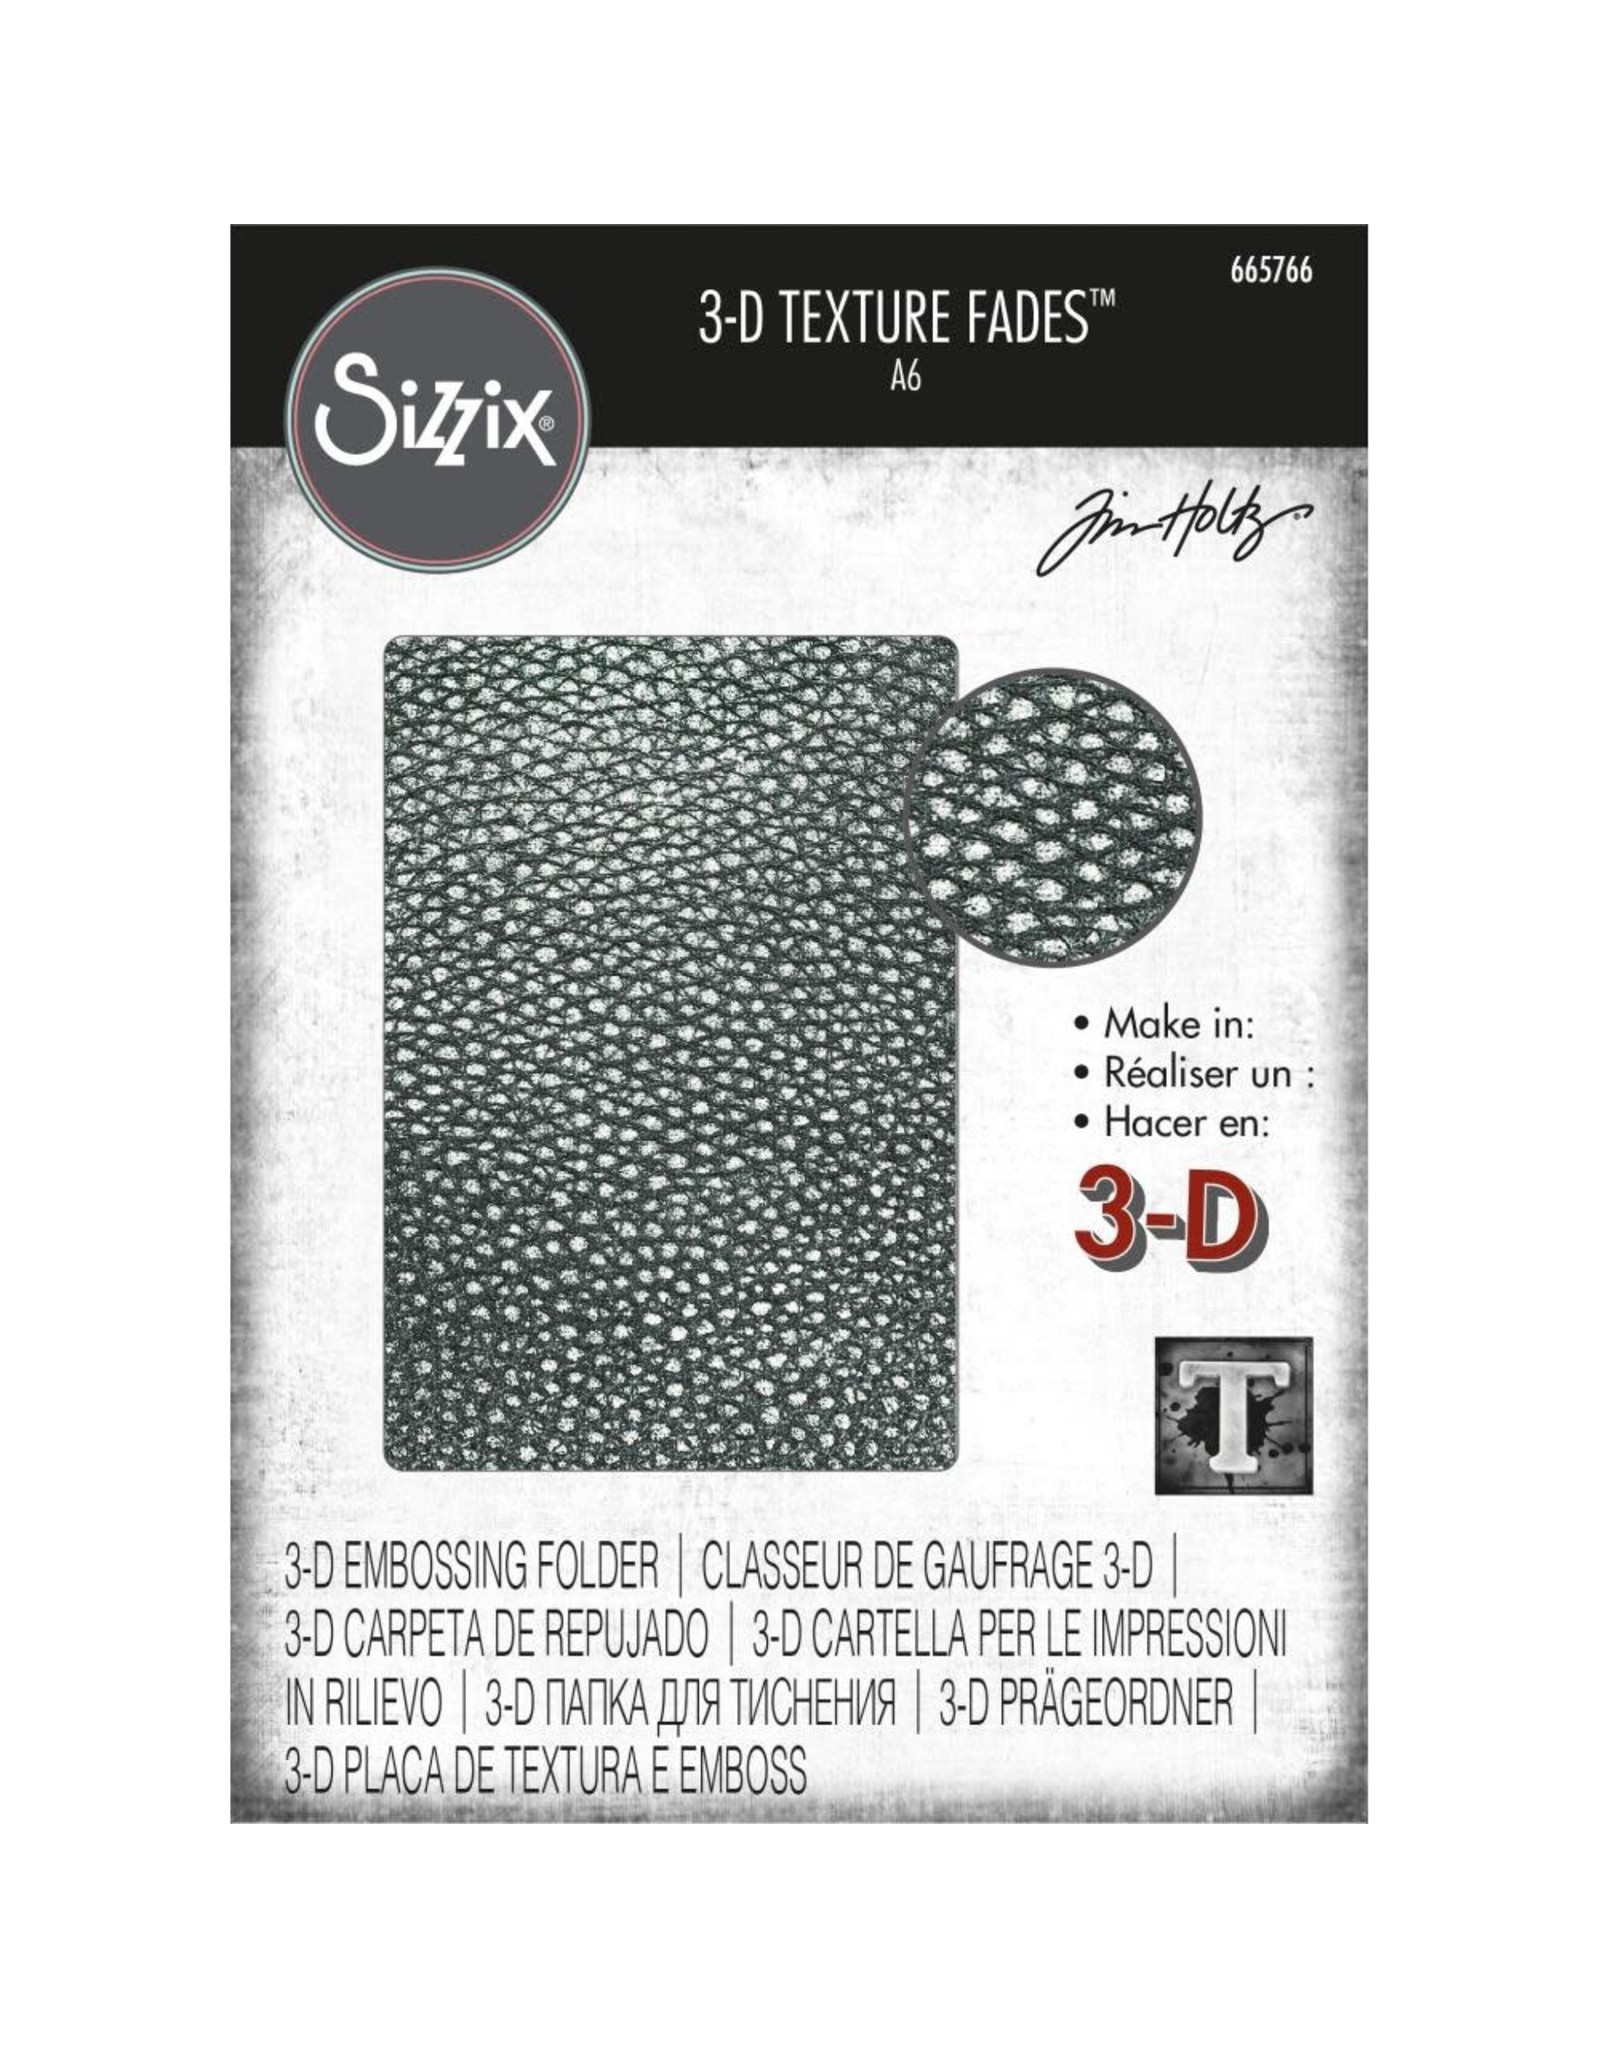 Tim Holtz - Sizzix 3D Texture Fades Embossing Folder - Cracked Leather